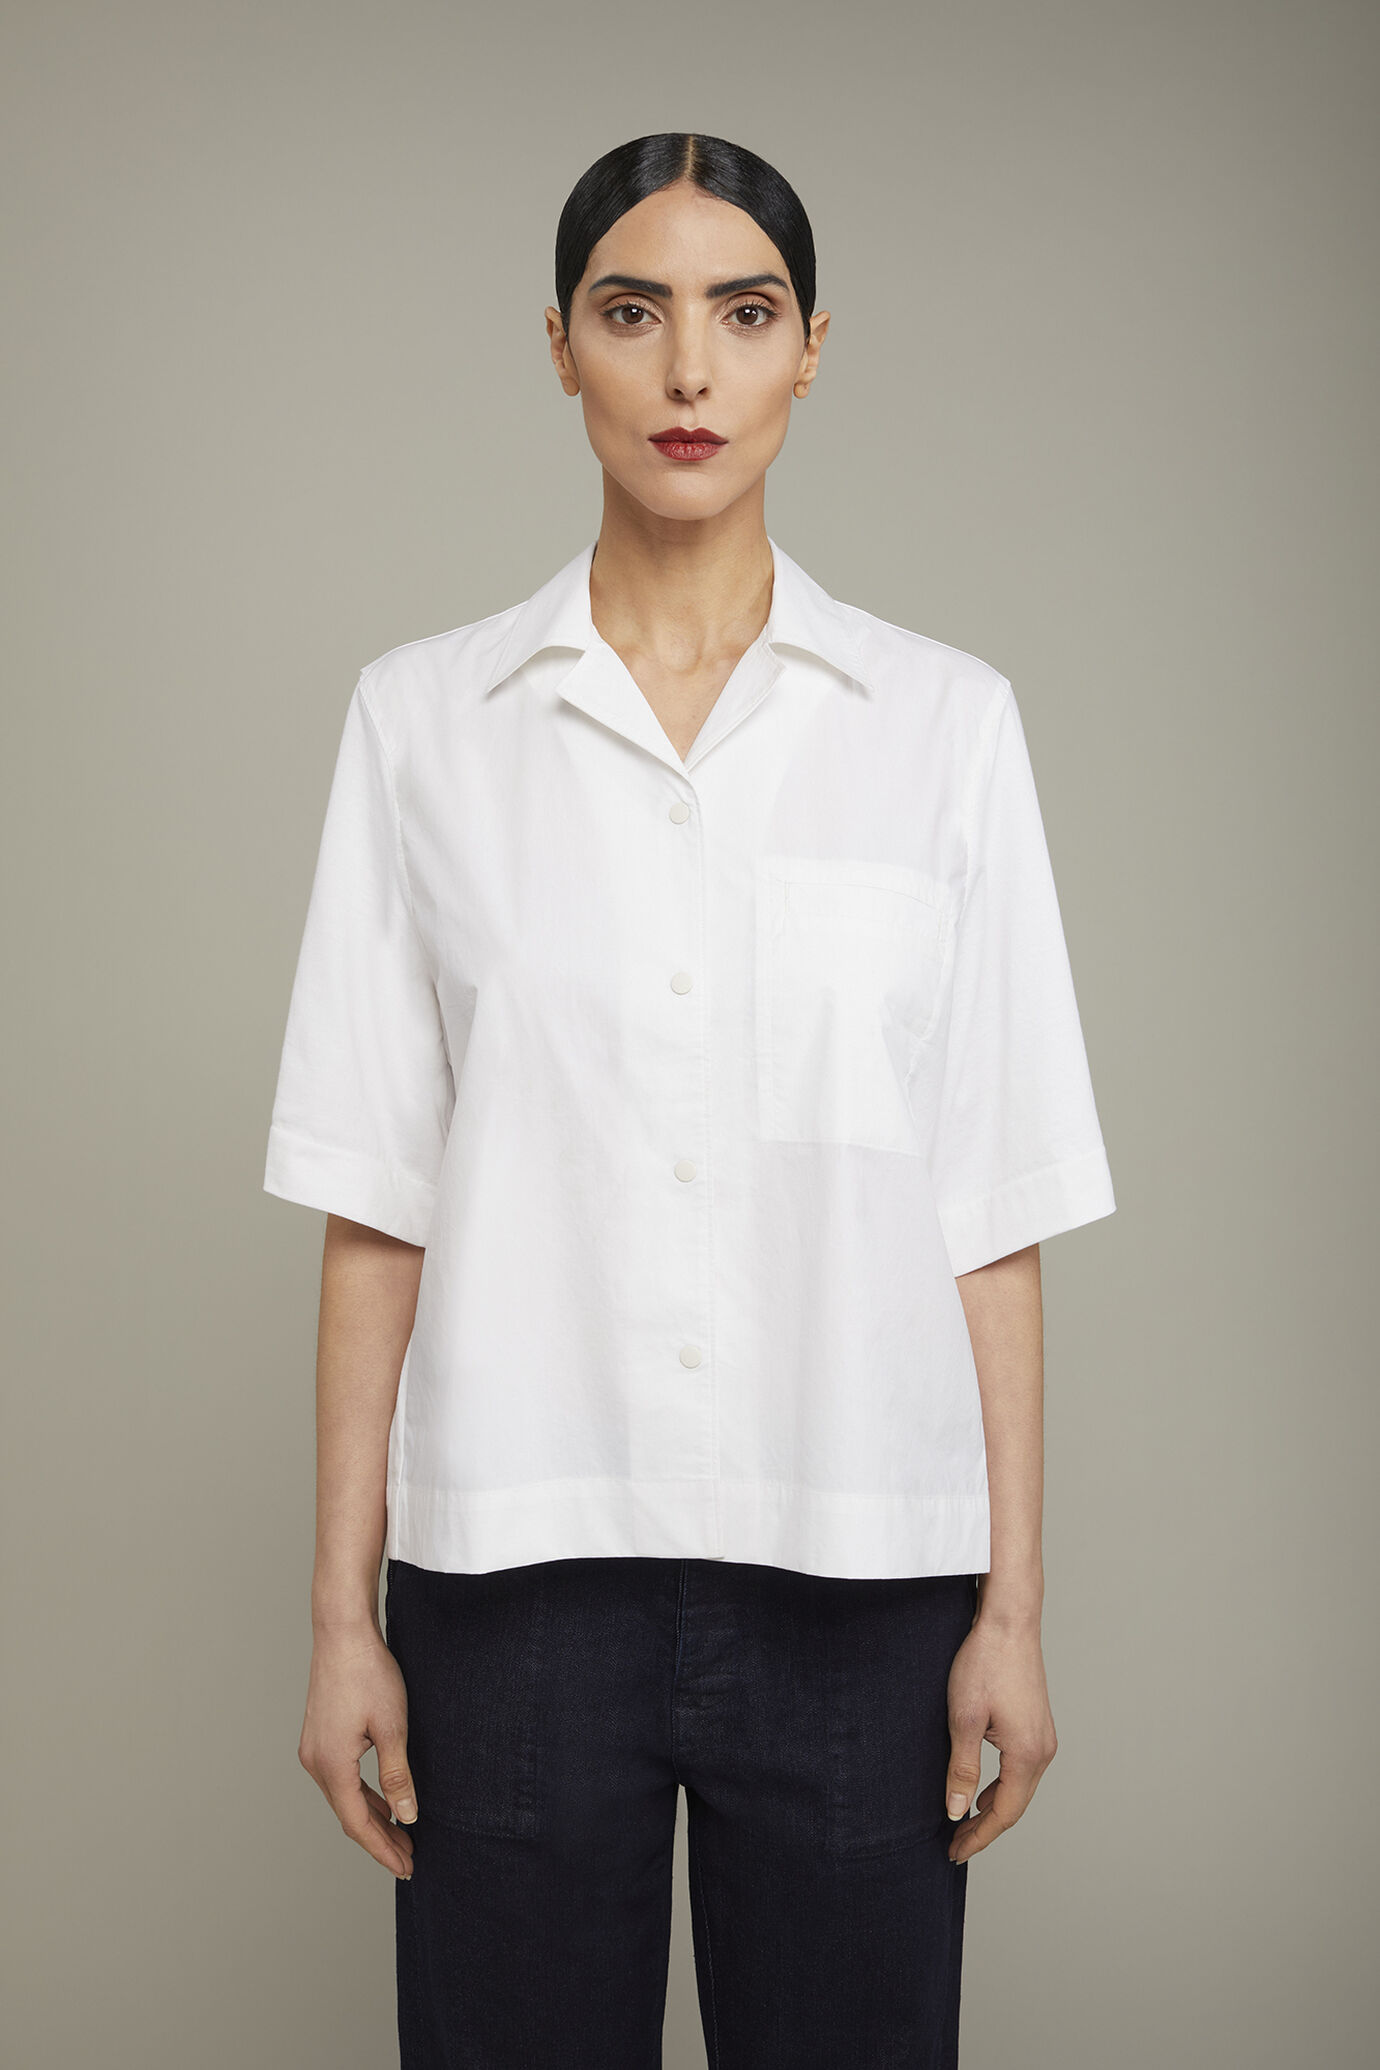 Women’s shirt with two contrasting fabrics